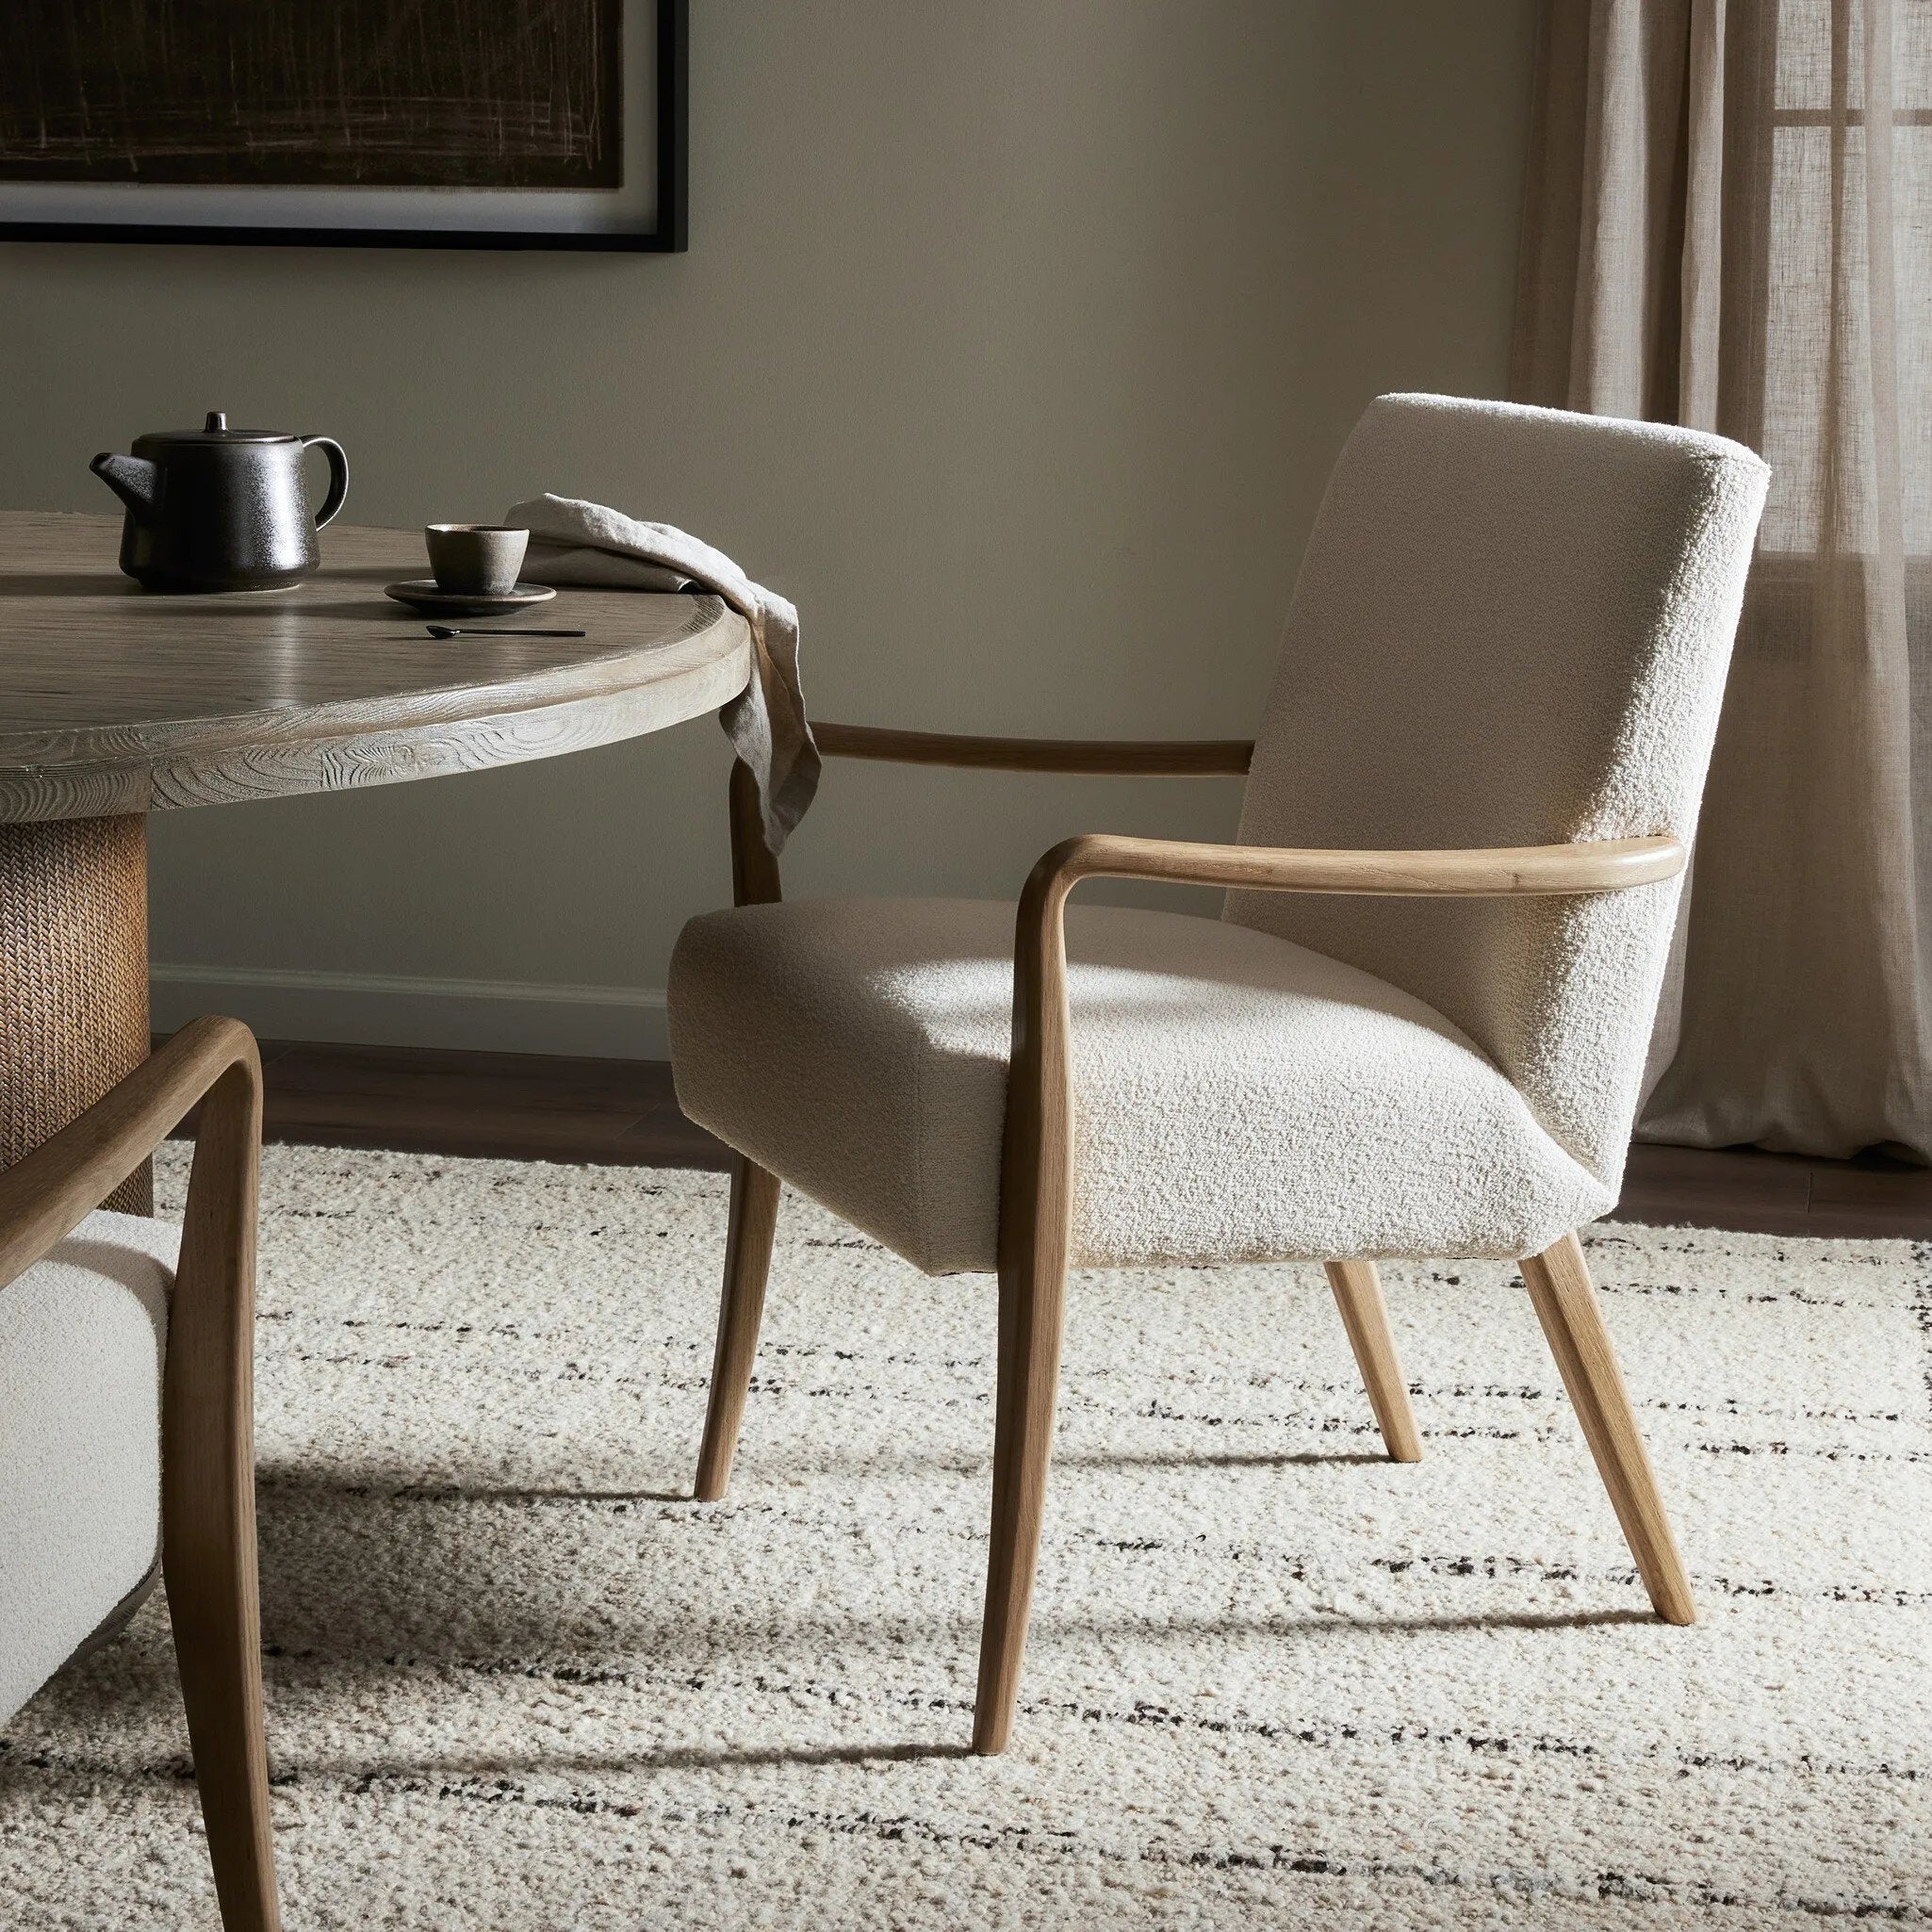 Add timeless midcentury design to your table with this Danish-inspired dining chair. Fluid oak arms and cream upholstery create a chair that embodies both comfort and style.Collection: Ashfor Amethyst Home provides interior design, new home construction design consulting, vintage area rugs, and lighting in the Winter Garden metro area.